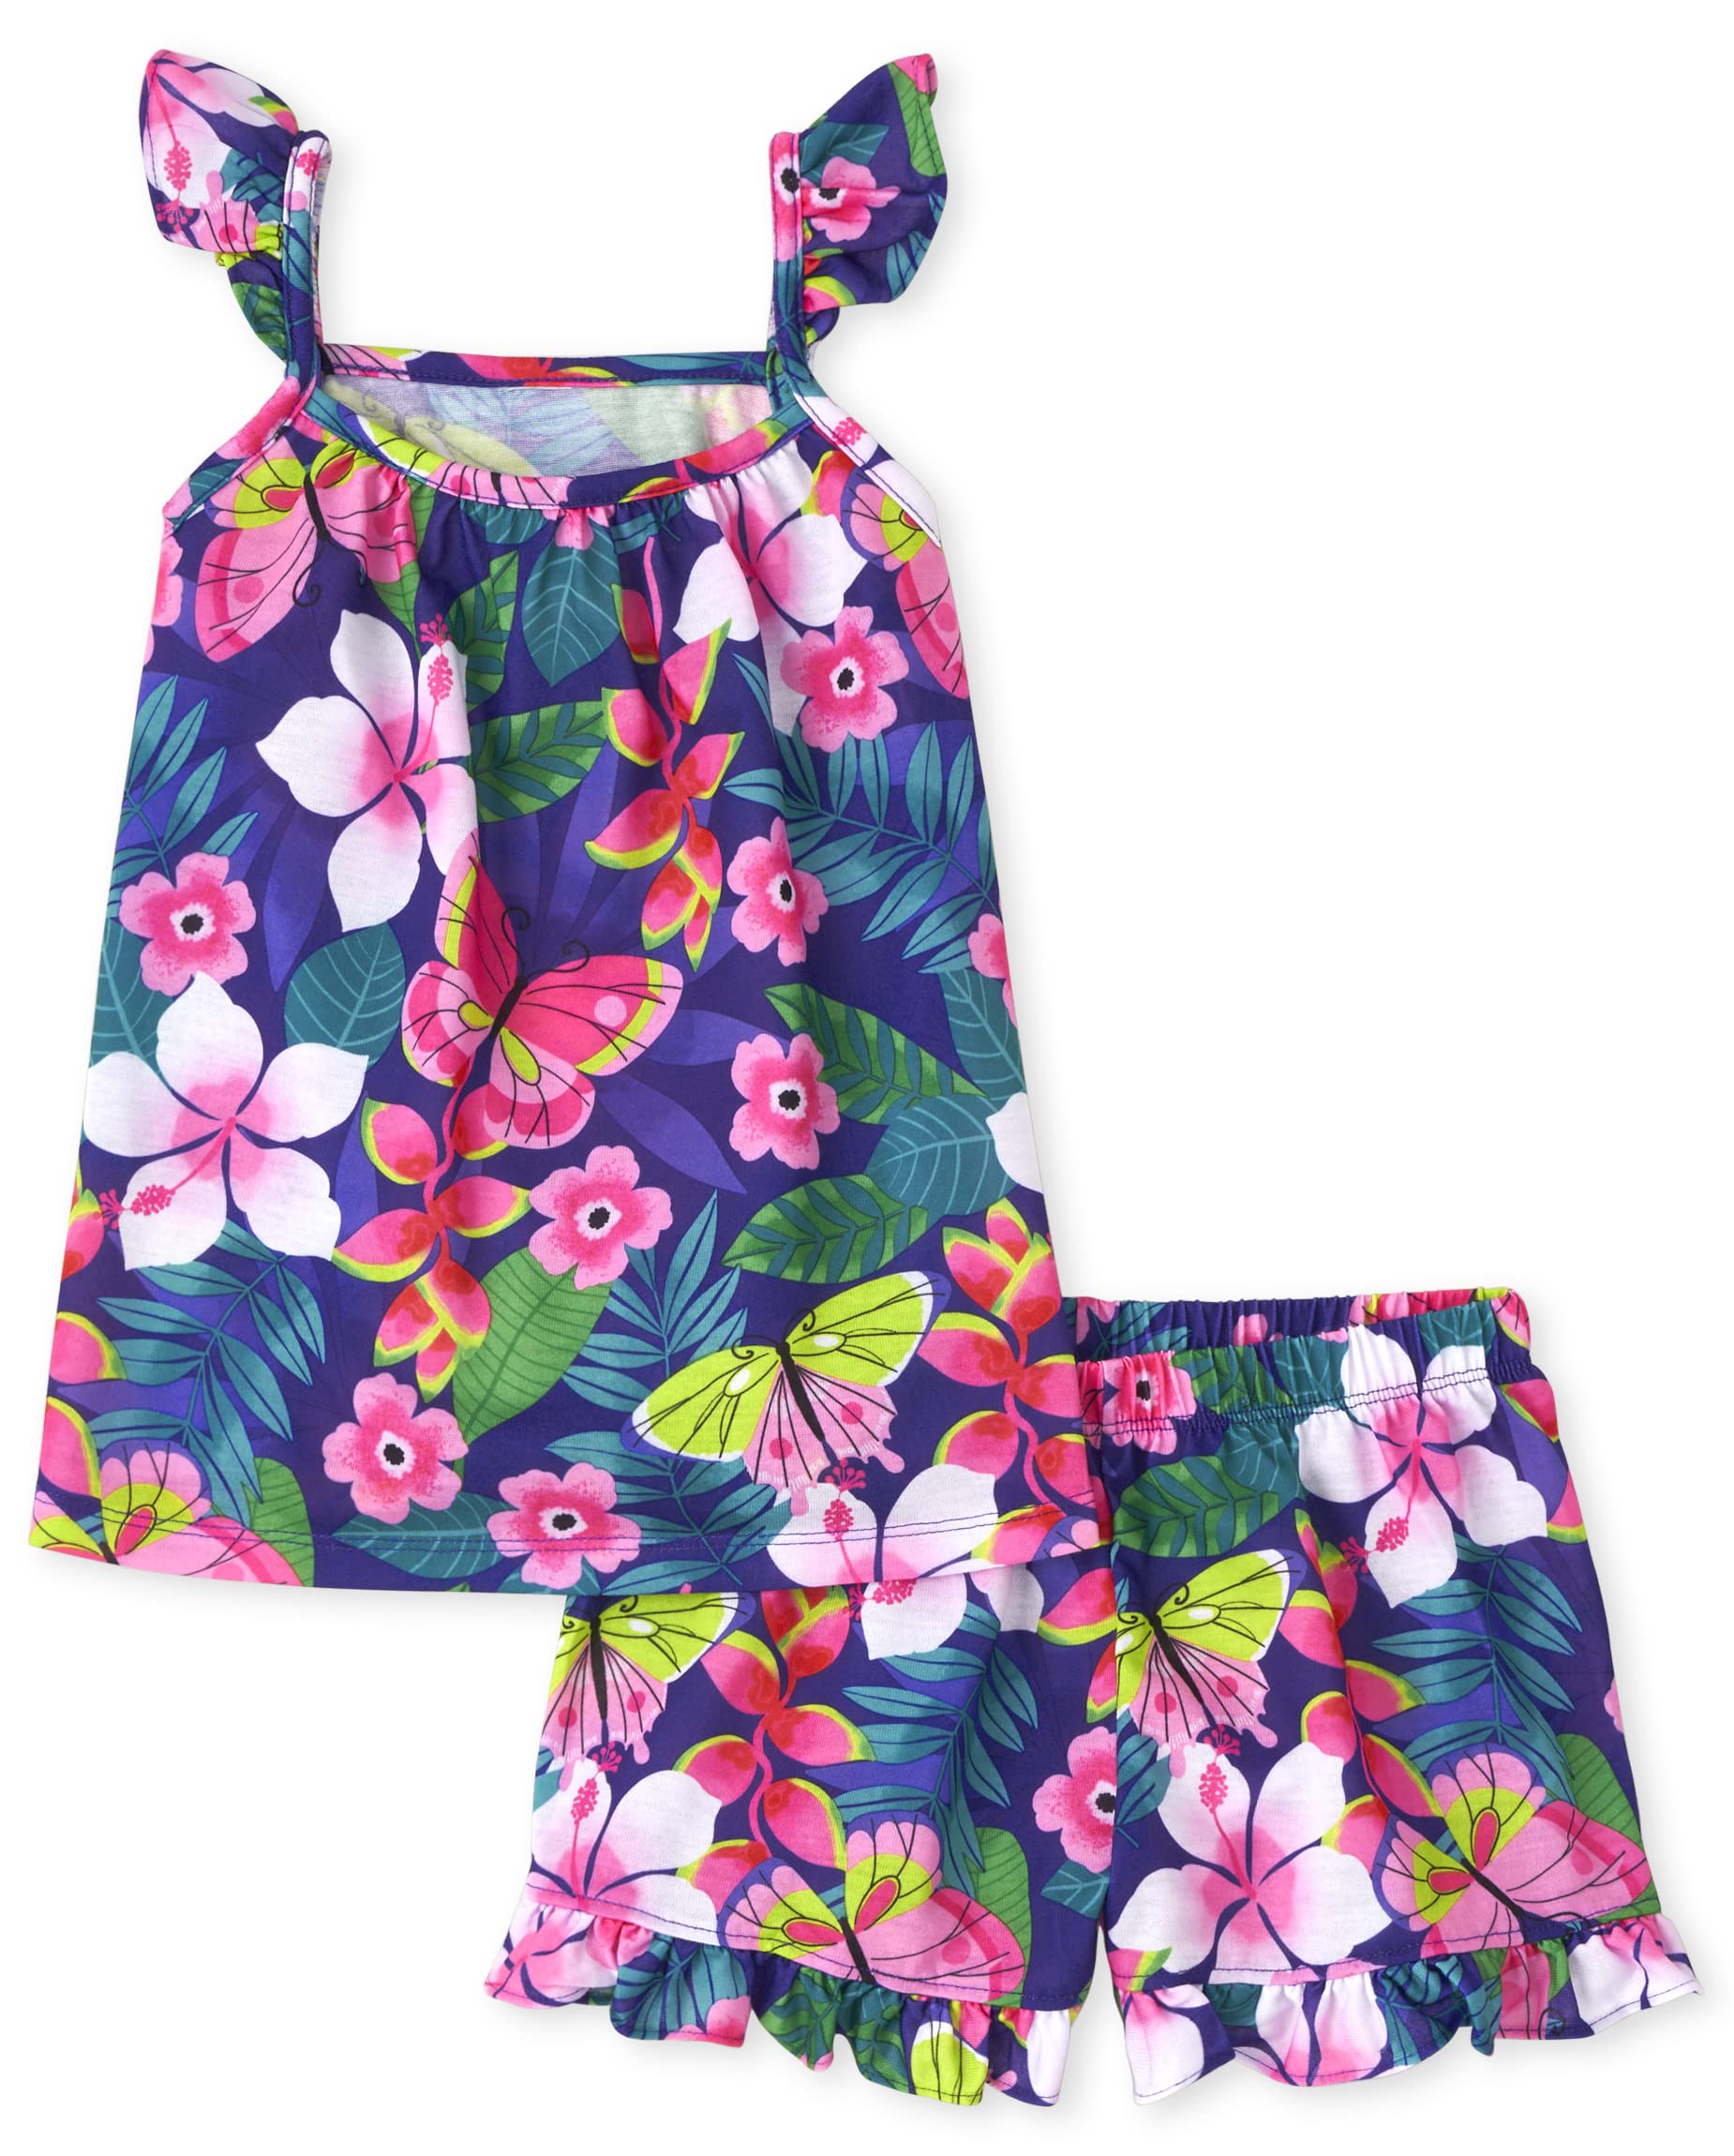 The Children's Place Girls' Sleeveless Tank Top and Short 2 Piece Pajama Set, Tropical Purple, Large (10/12)